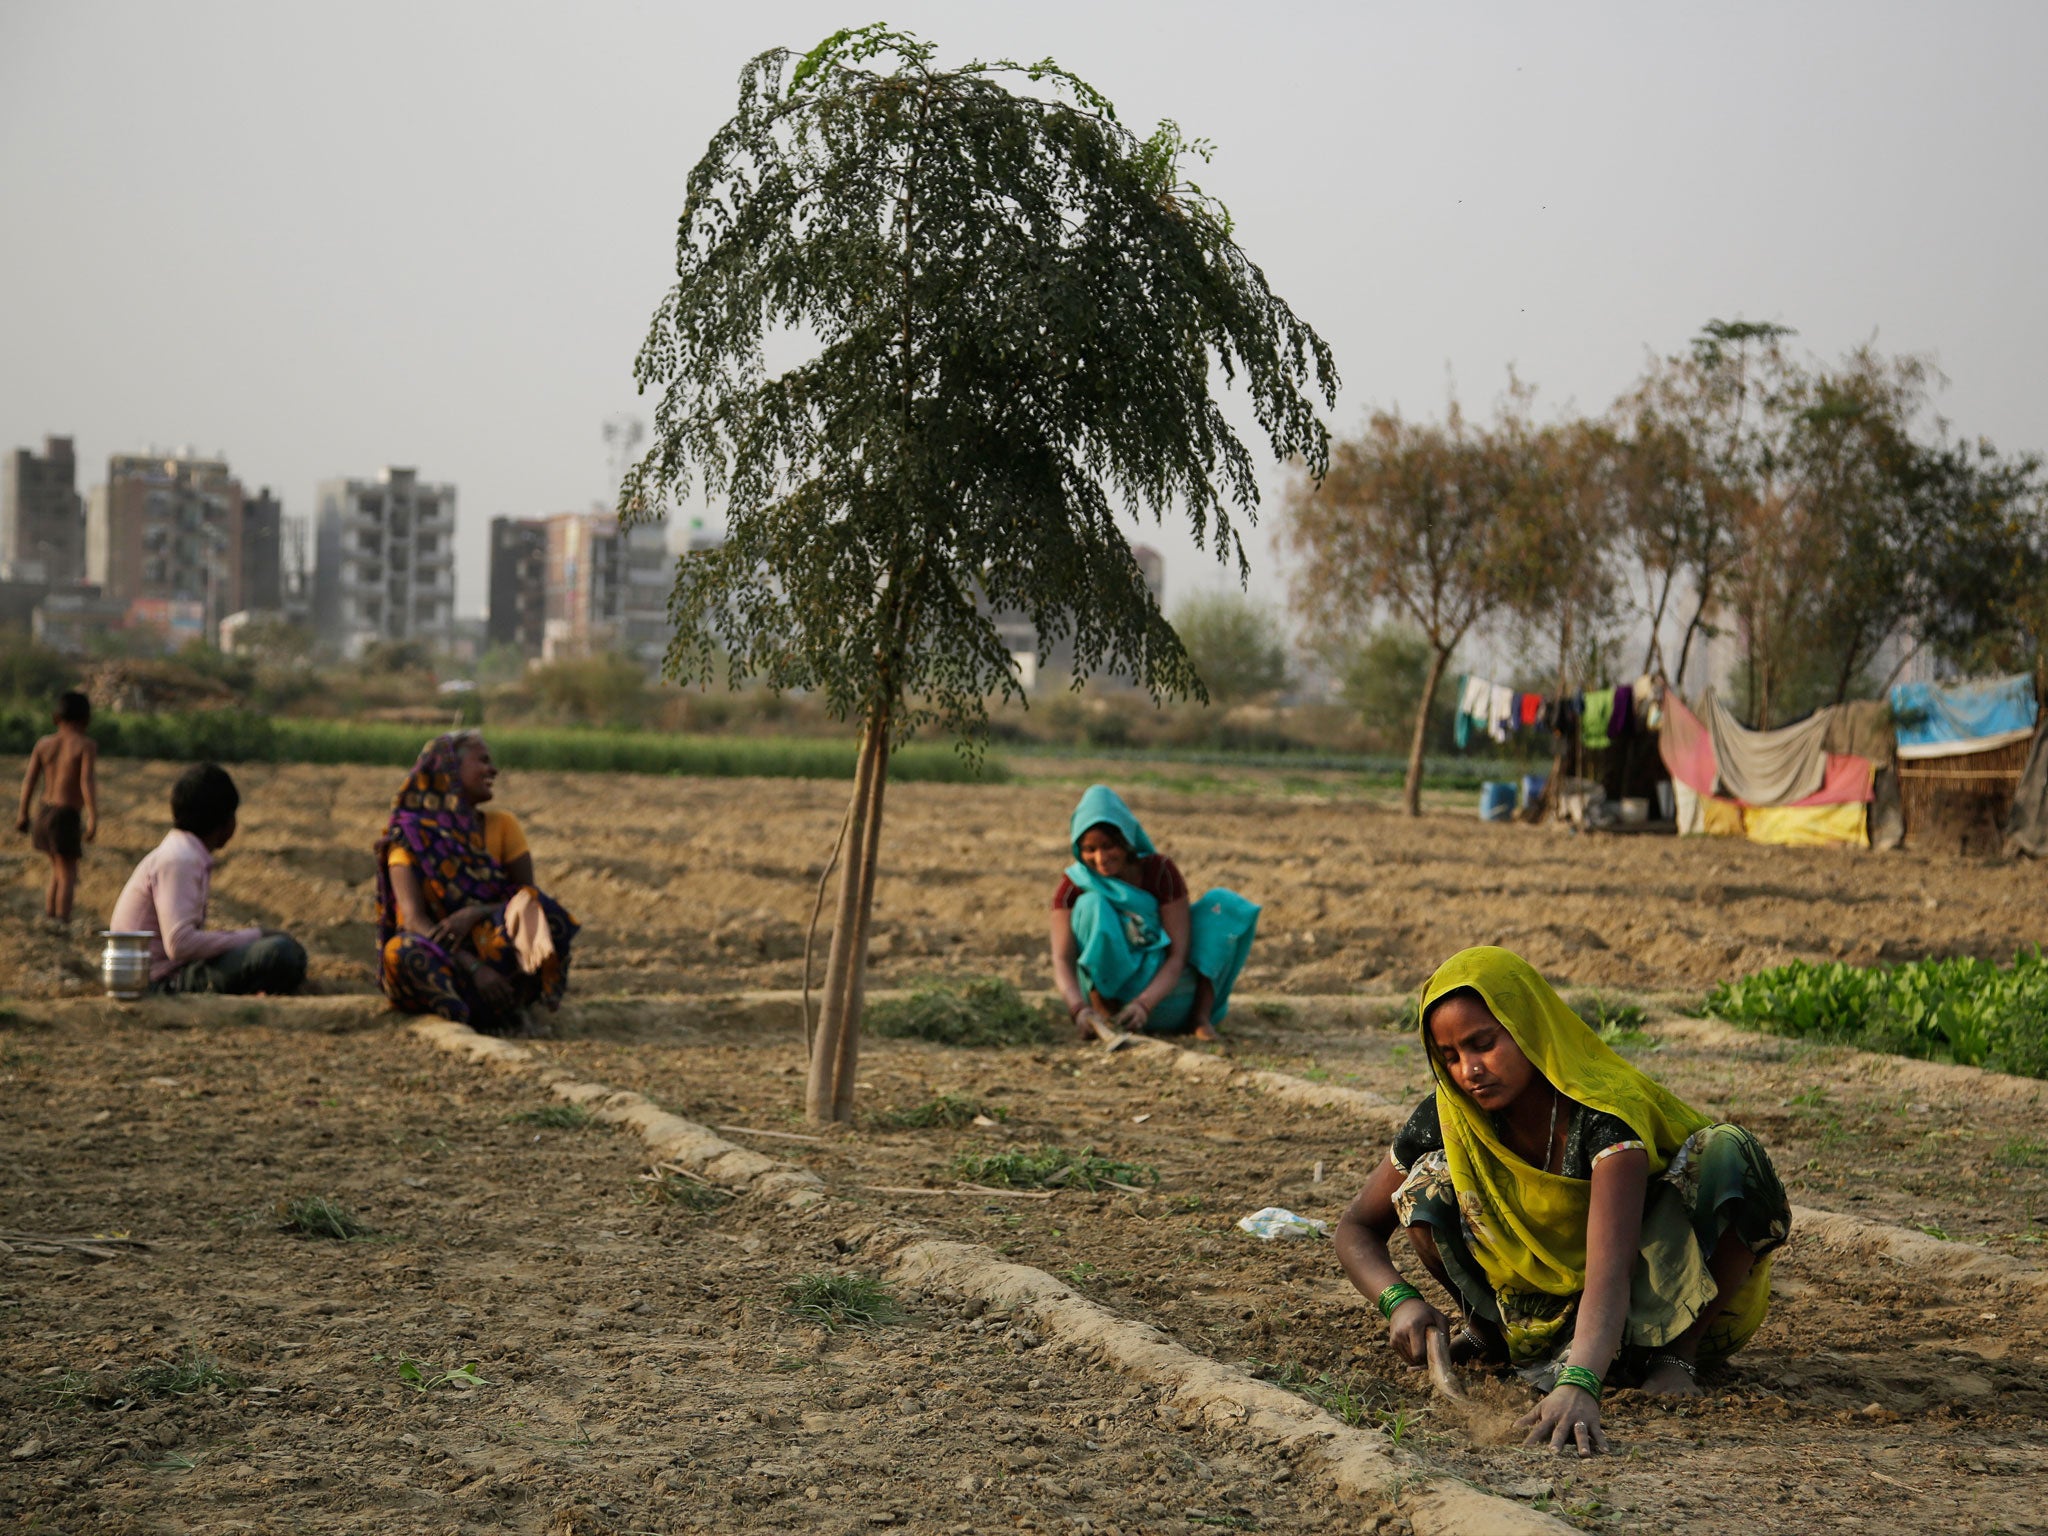 Researchers found a link between crop-damaging temperatures and suicide rates in India